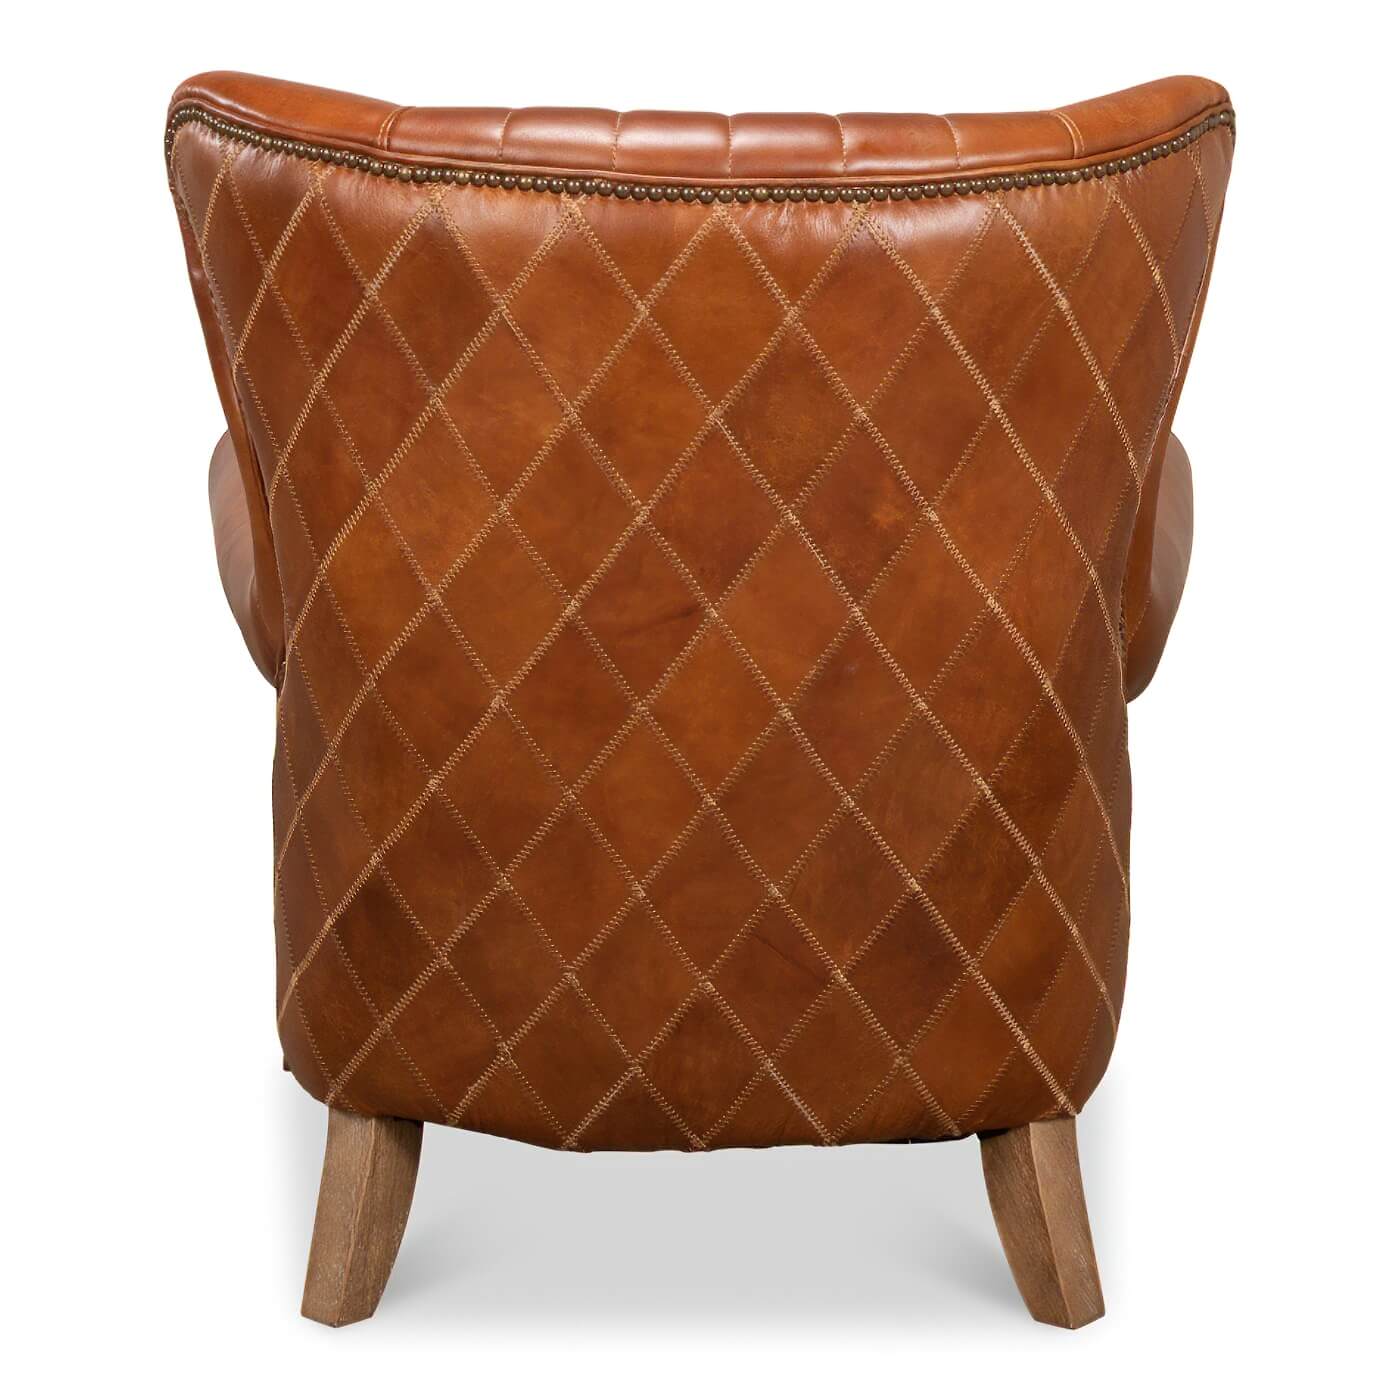 Classic Quilted Leather Armchair - English Georgian America